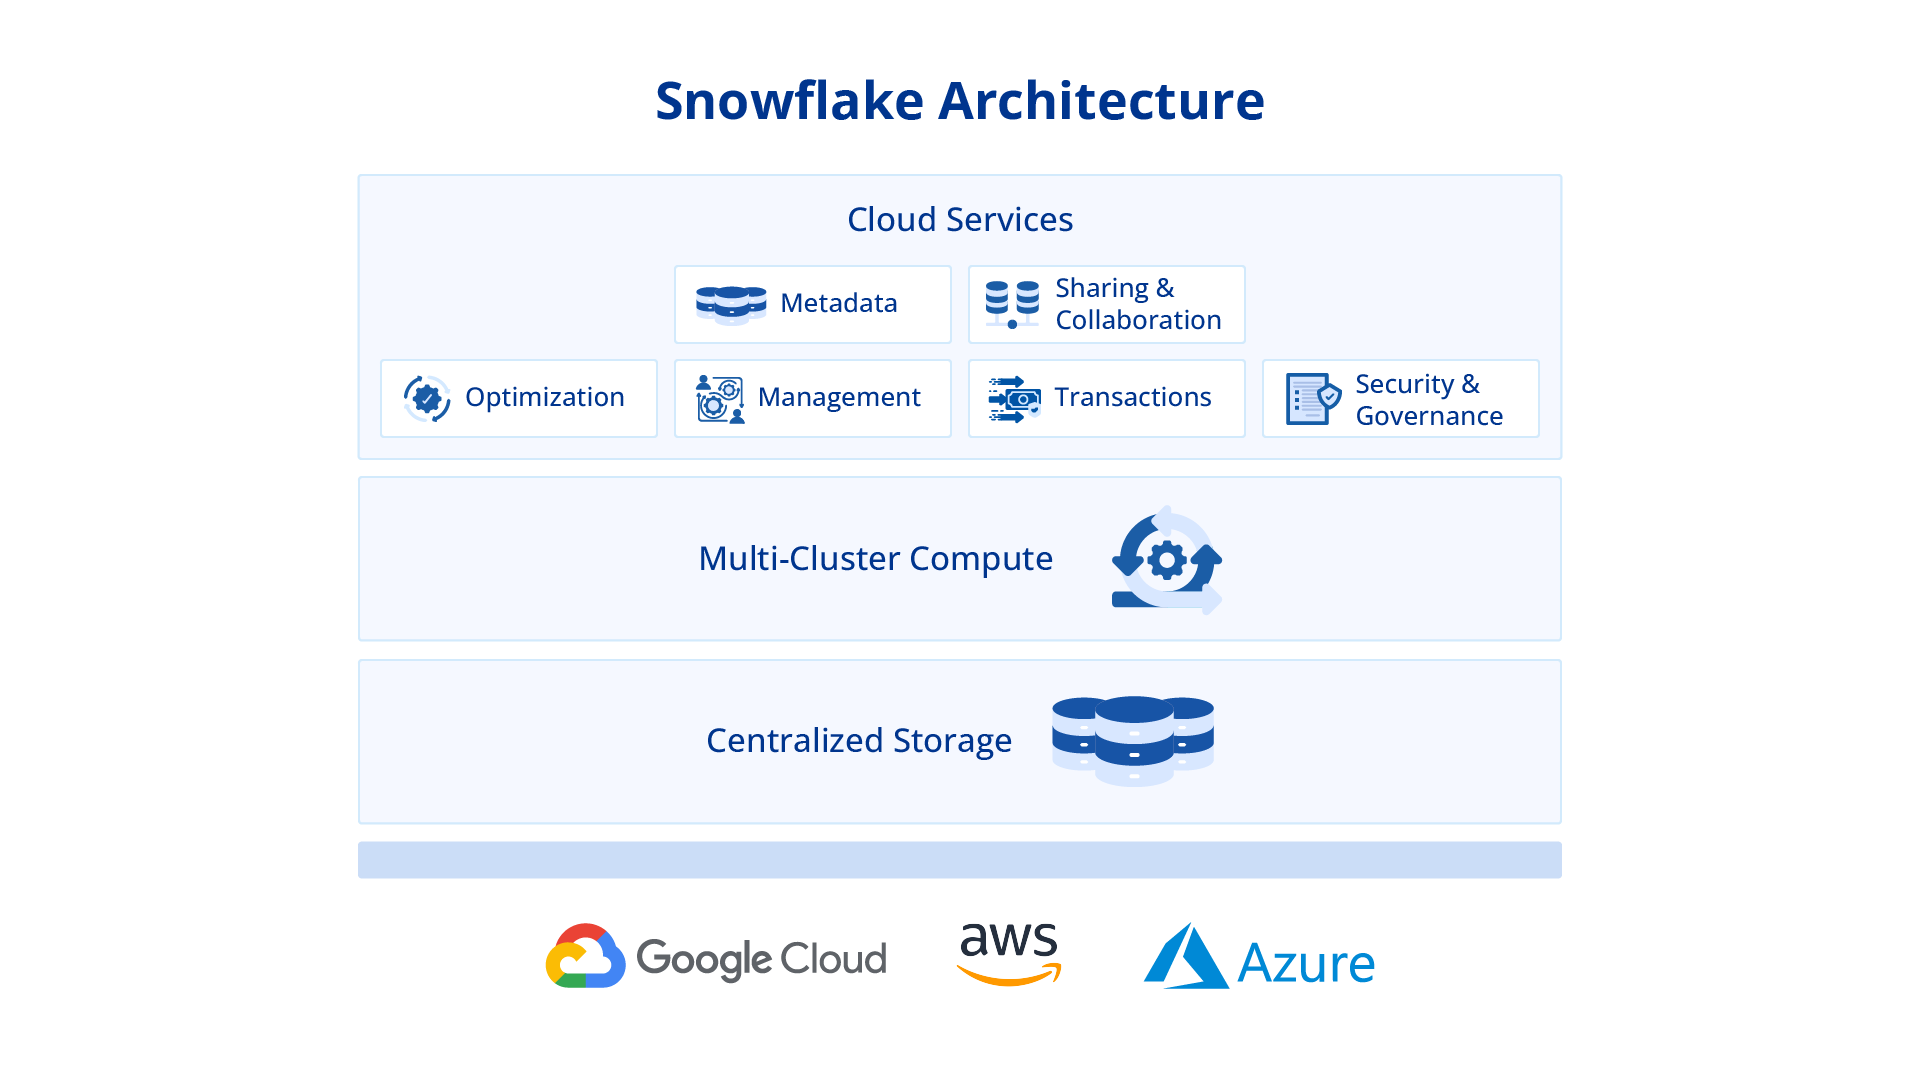 An image depicting Snowflake's architecture.